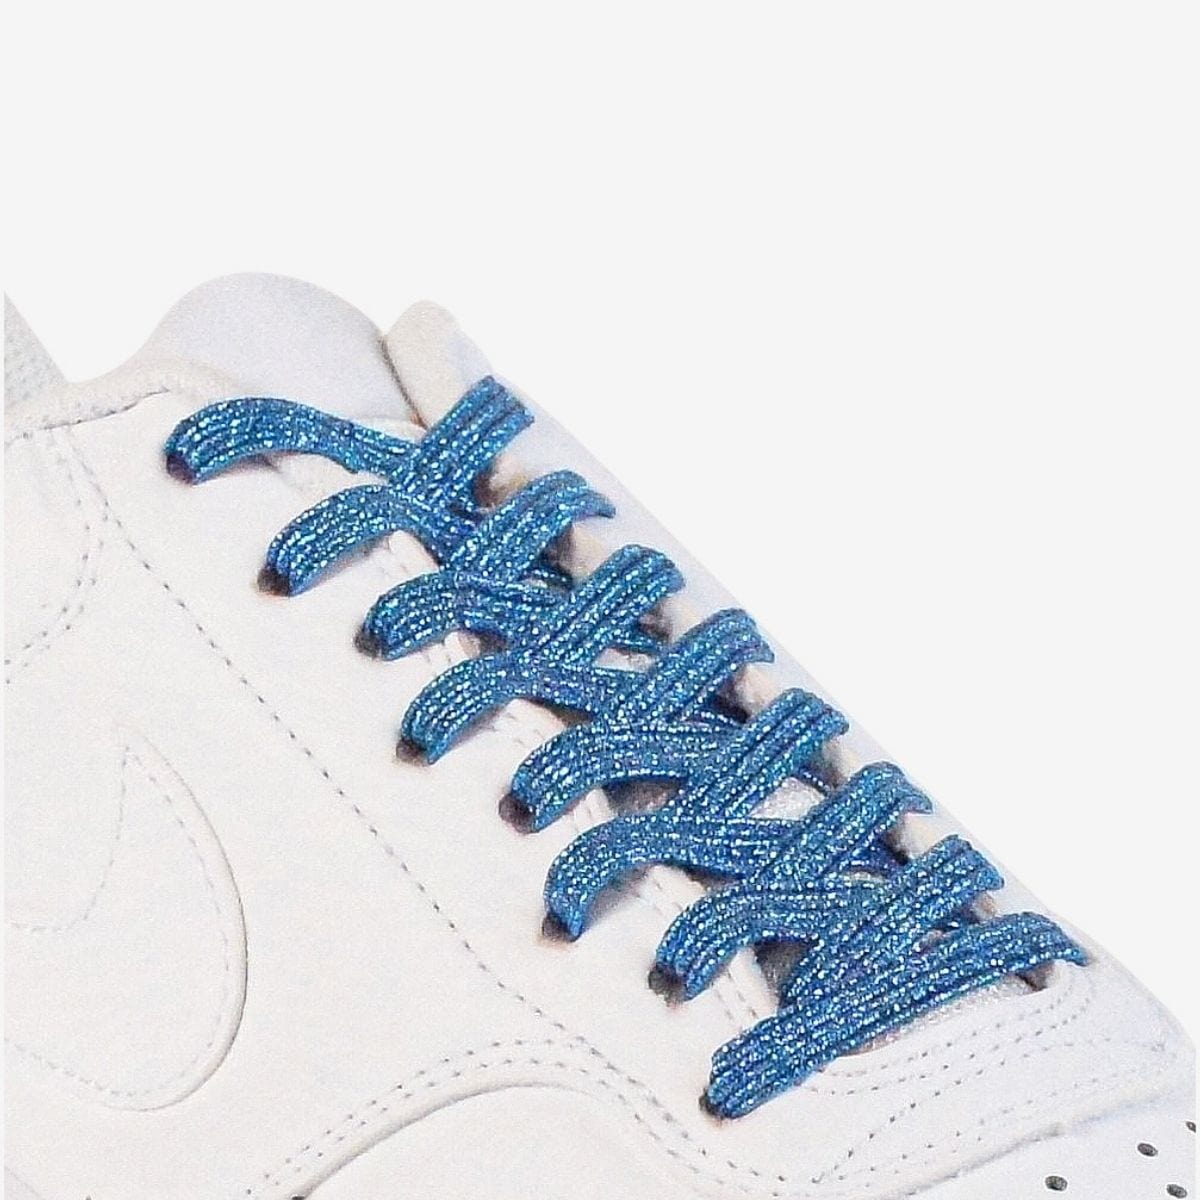 different-ways-to-lace-shoes-with-blue-elastic-shoelaces-on-white-kicks